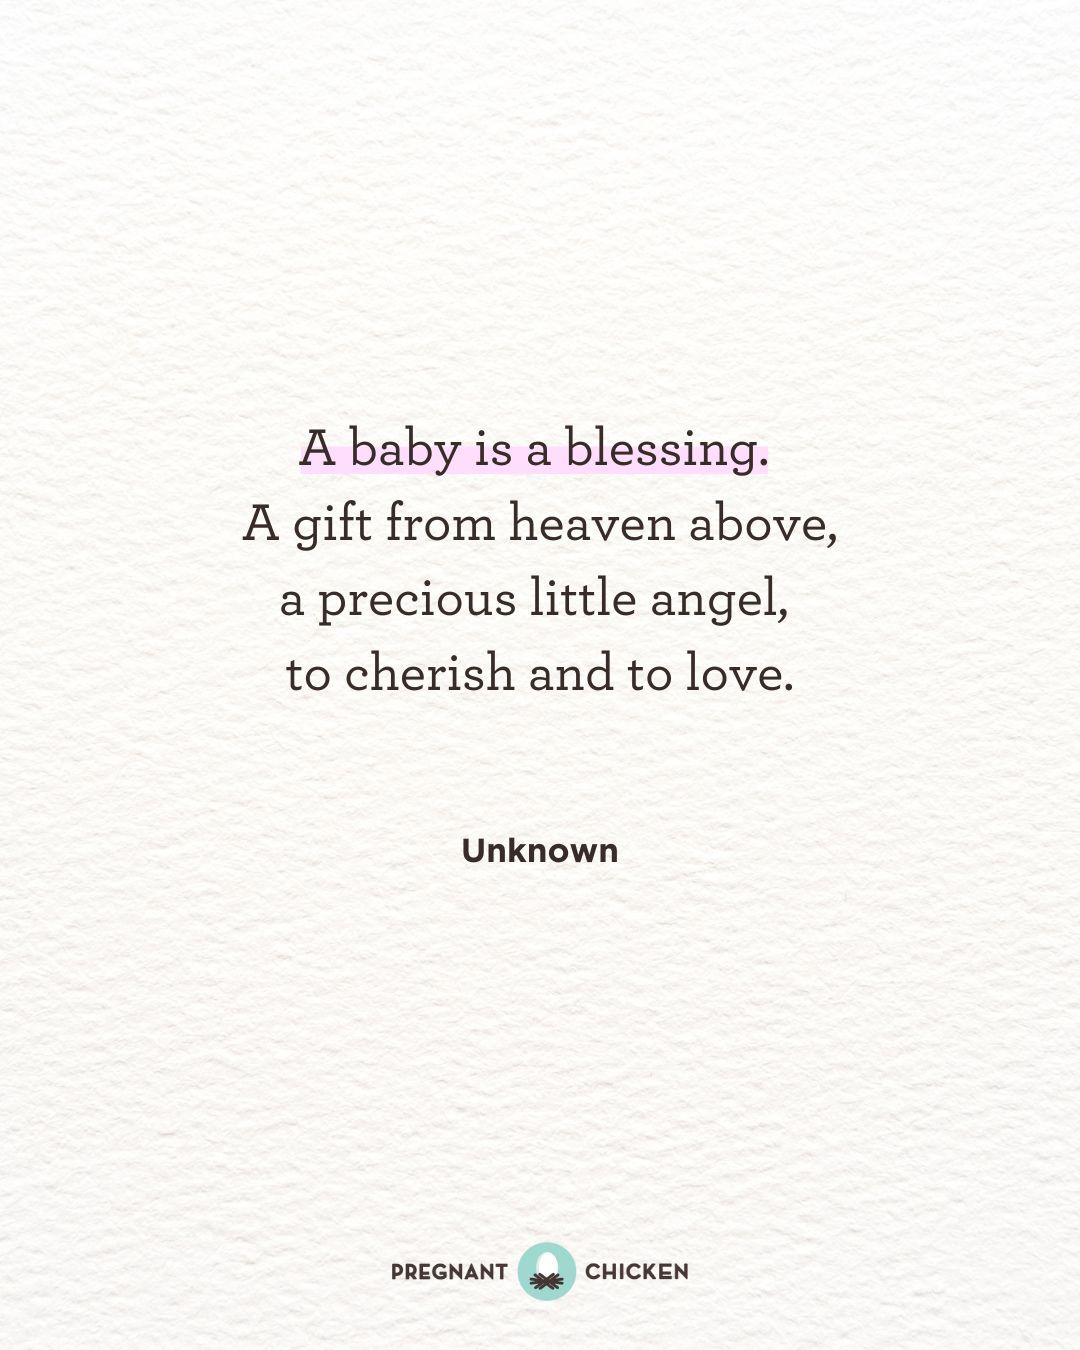 A baby is a blessing.  A gift from heaven above, a precious little angel,  to cherish and to love.